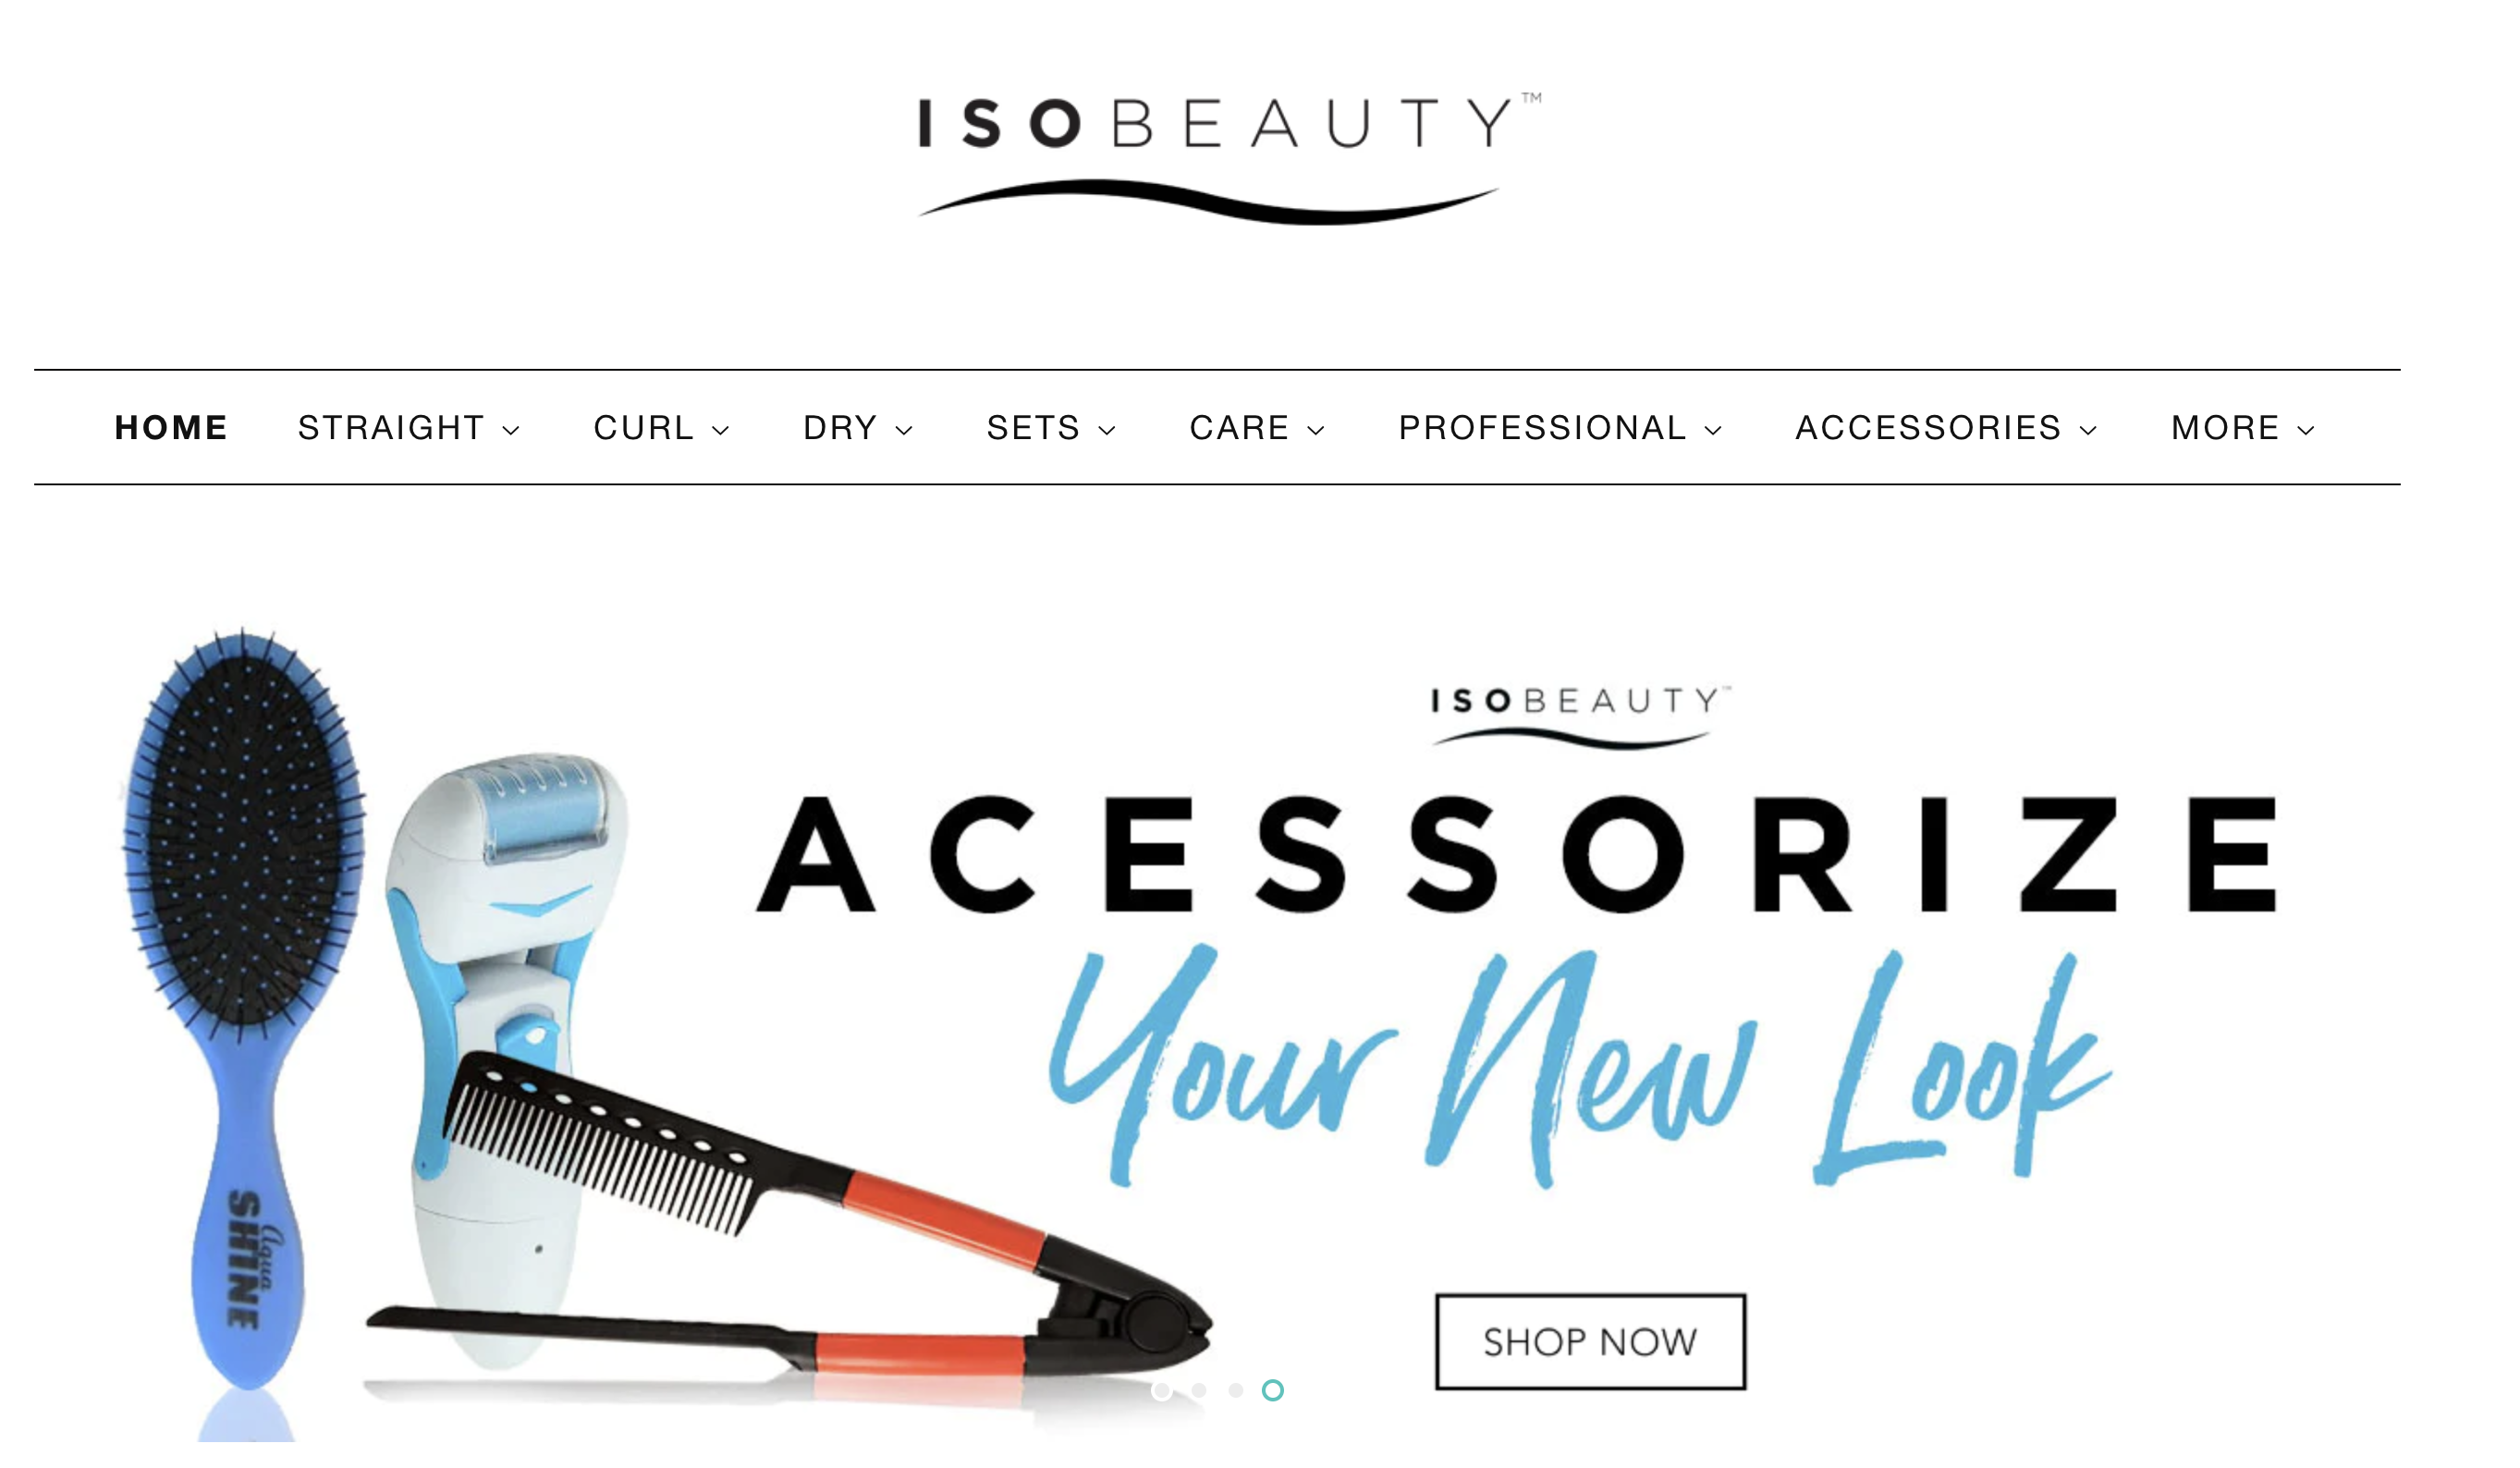 ISO Beauty's home page